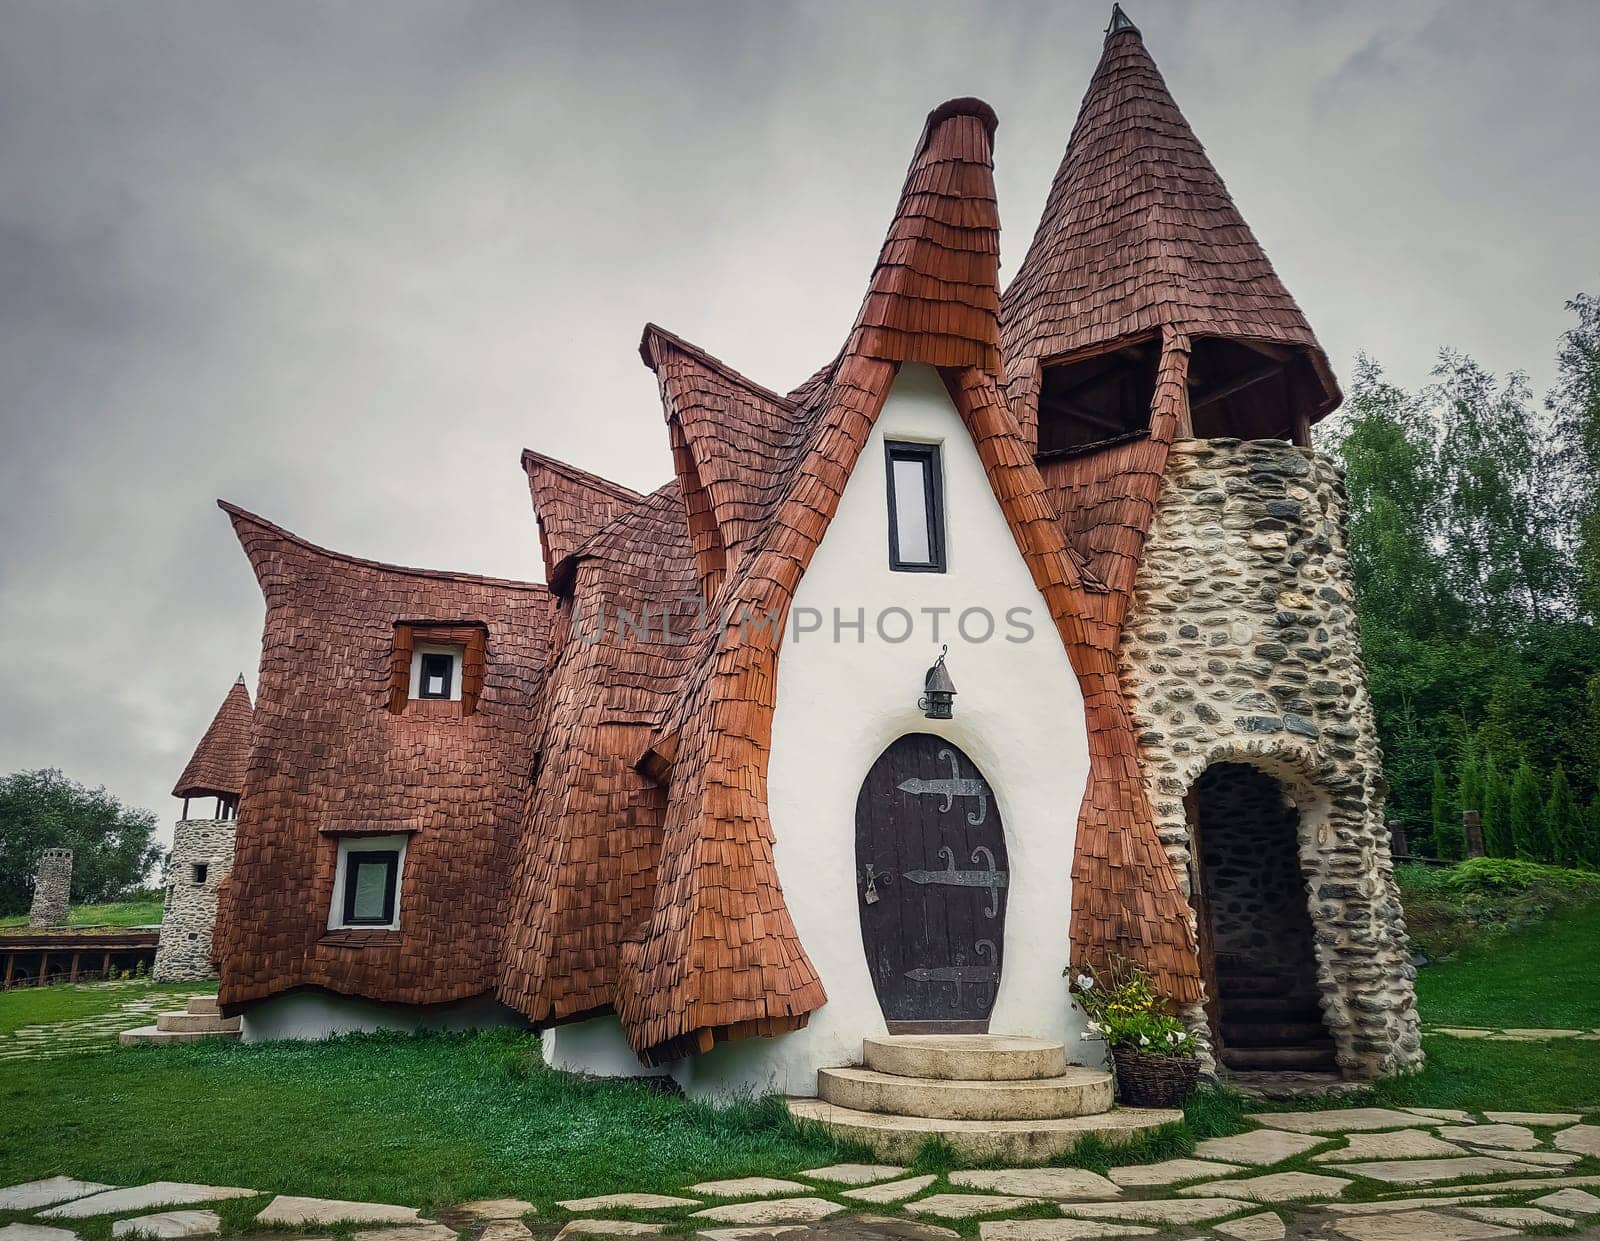 The Clay Castle from the Valley of Fairies, a touristic complex in Transylvania, Romania. The home of dwarf or hobbits from fantastic tales